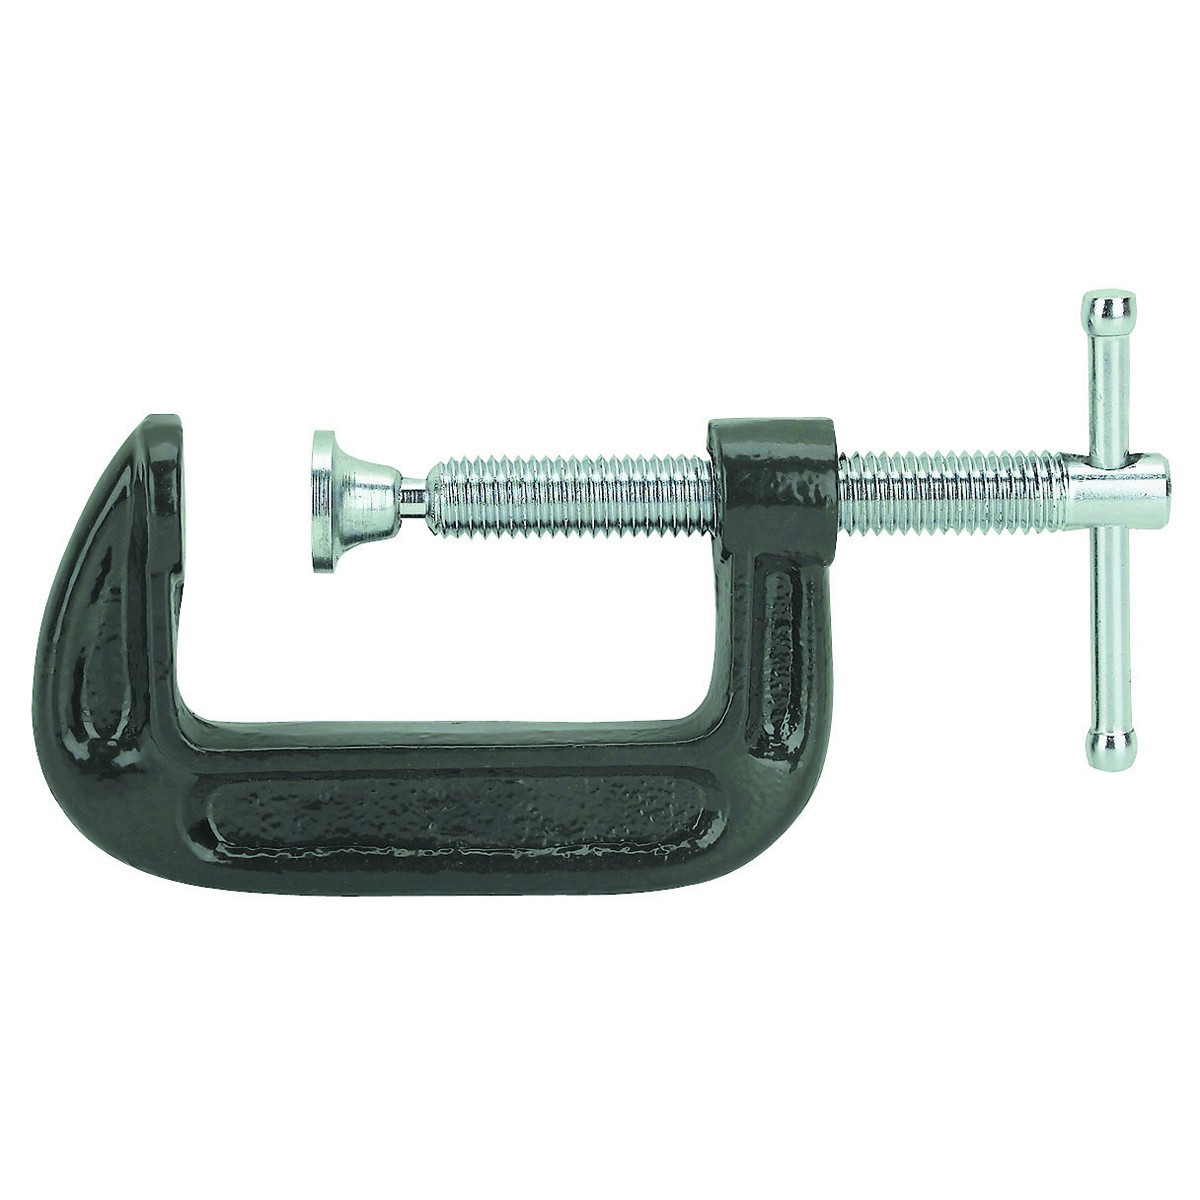 New   Pittsburgh  3 in. Industrial C-Clamp